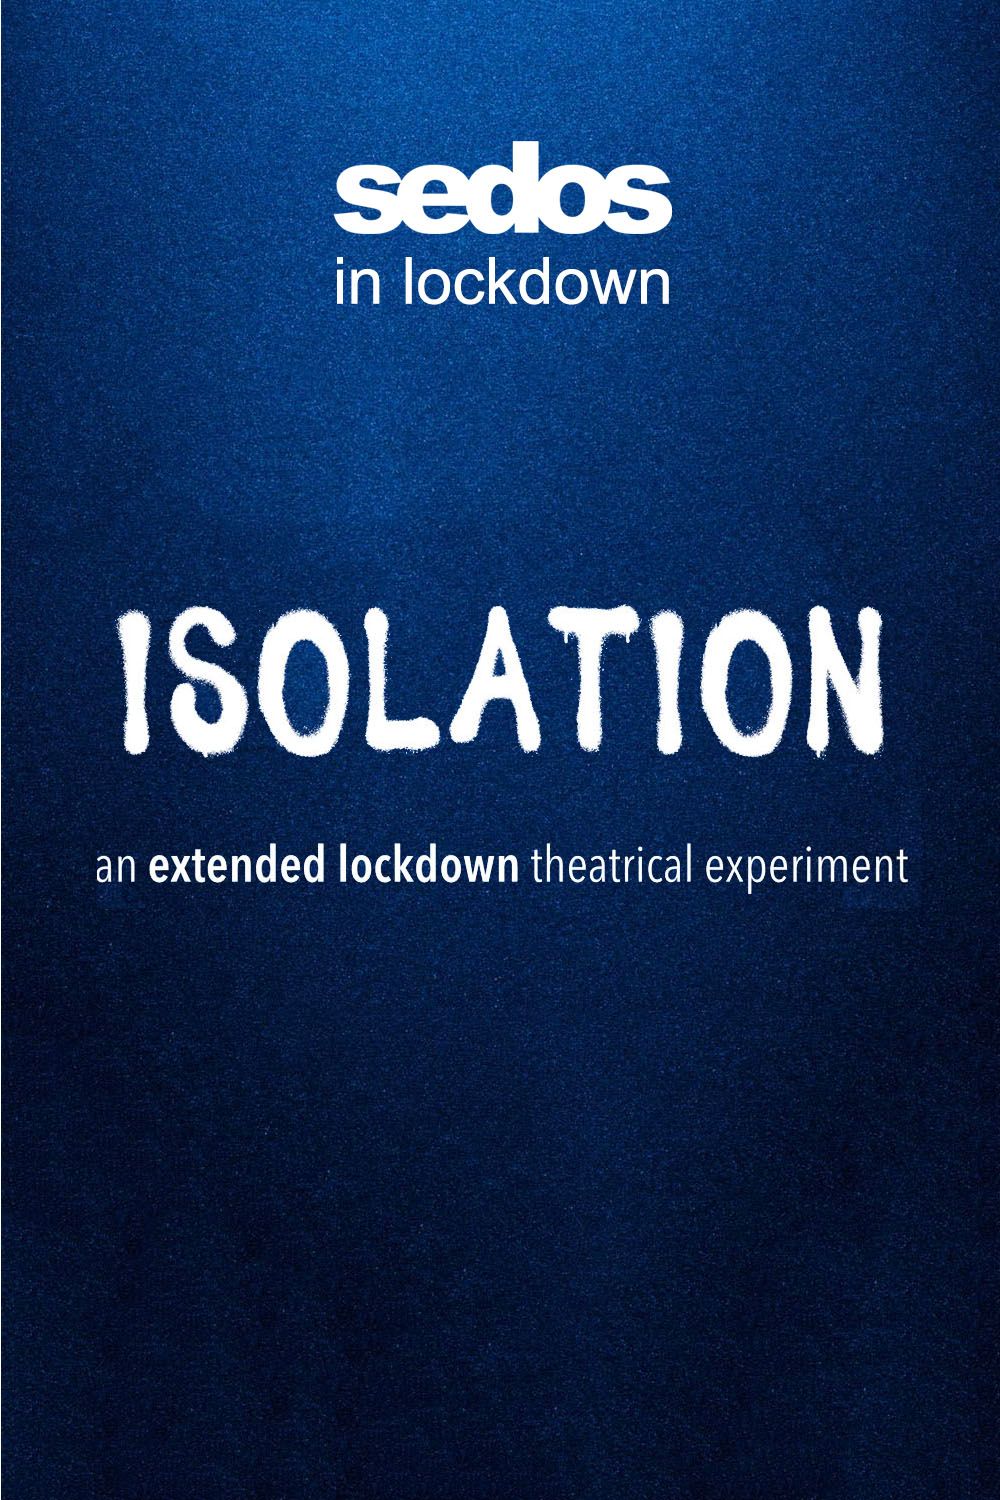 Isolation: A Lockdown Experiment flyer image